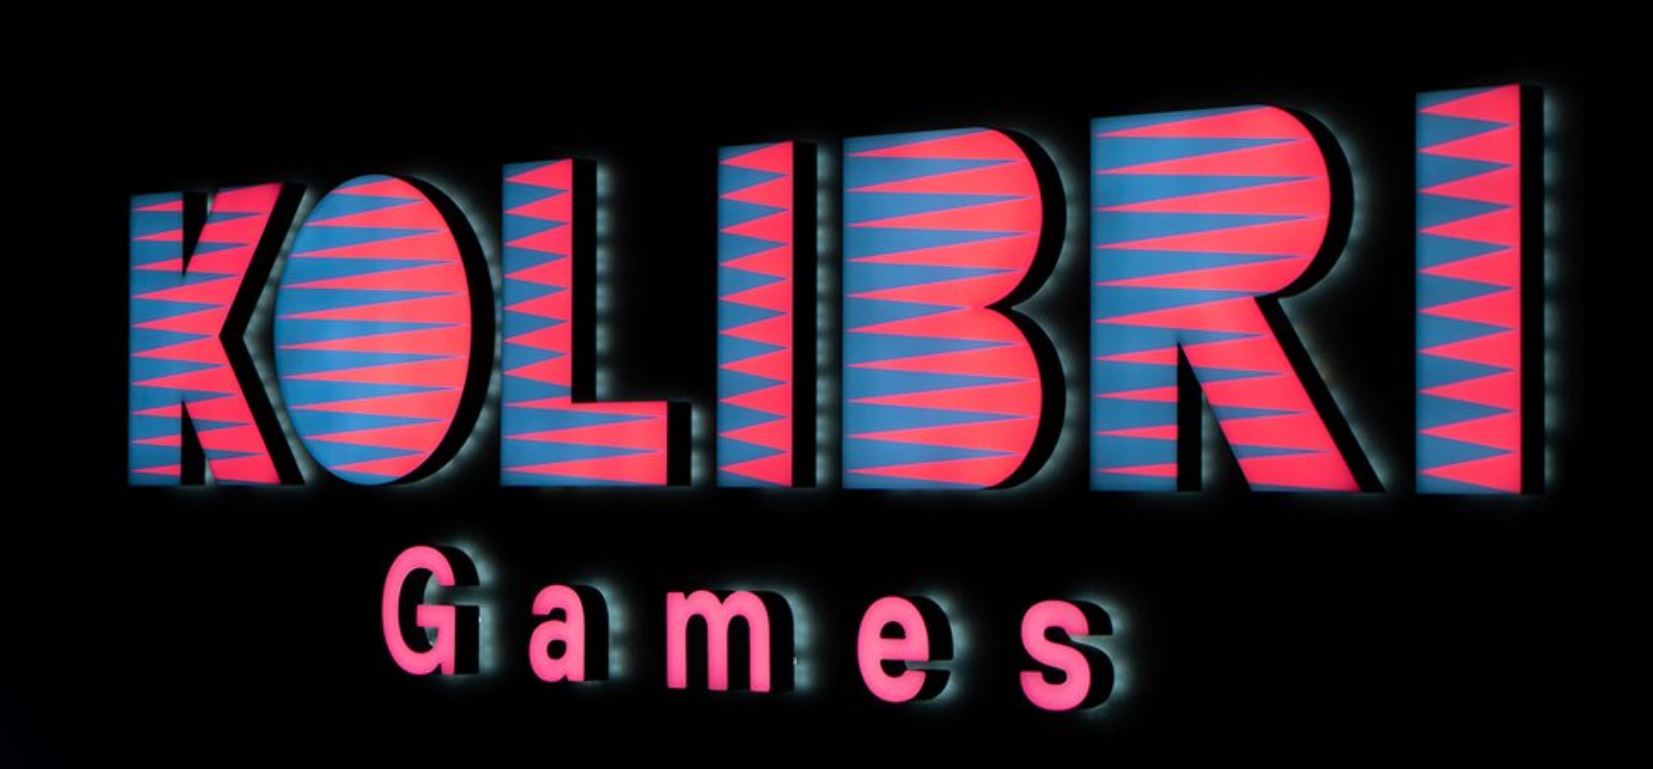 UBISOFT Reinforces its Position in Mobile Idle Games with Acquisition of KOLIBRI GAMES